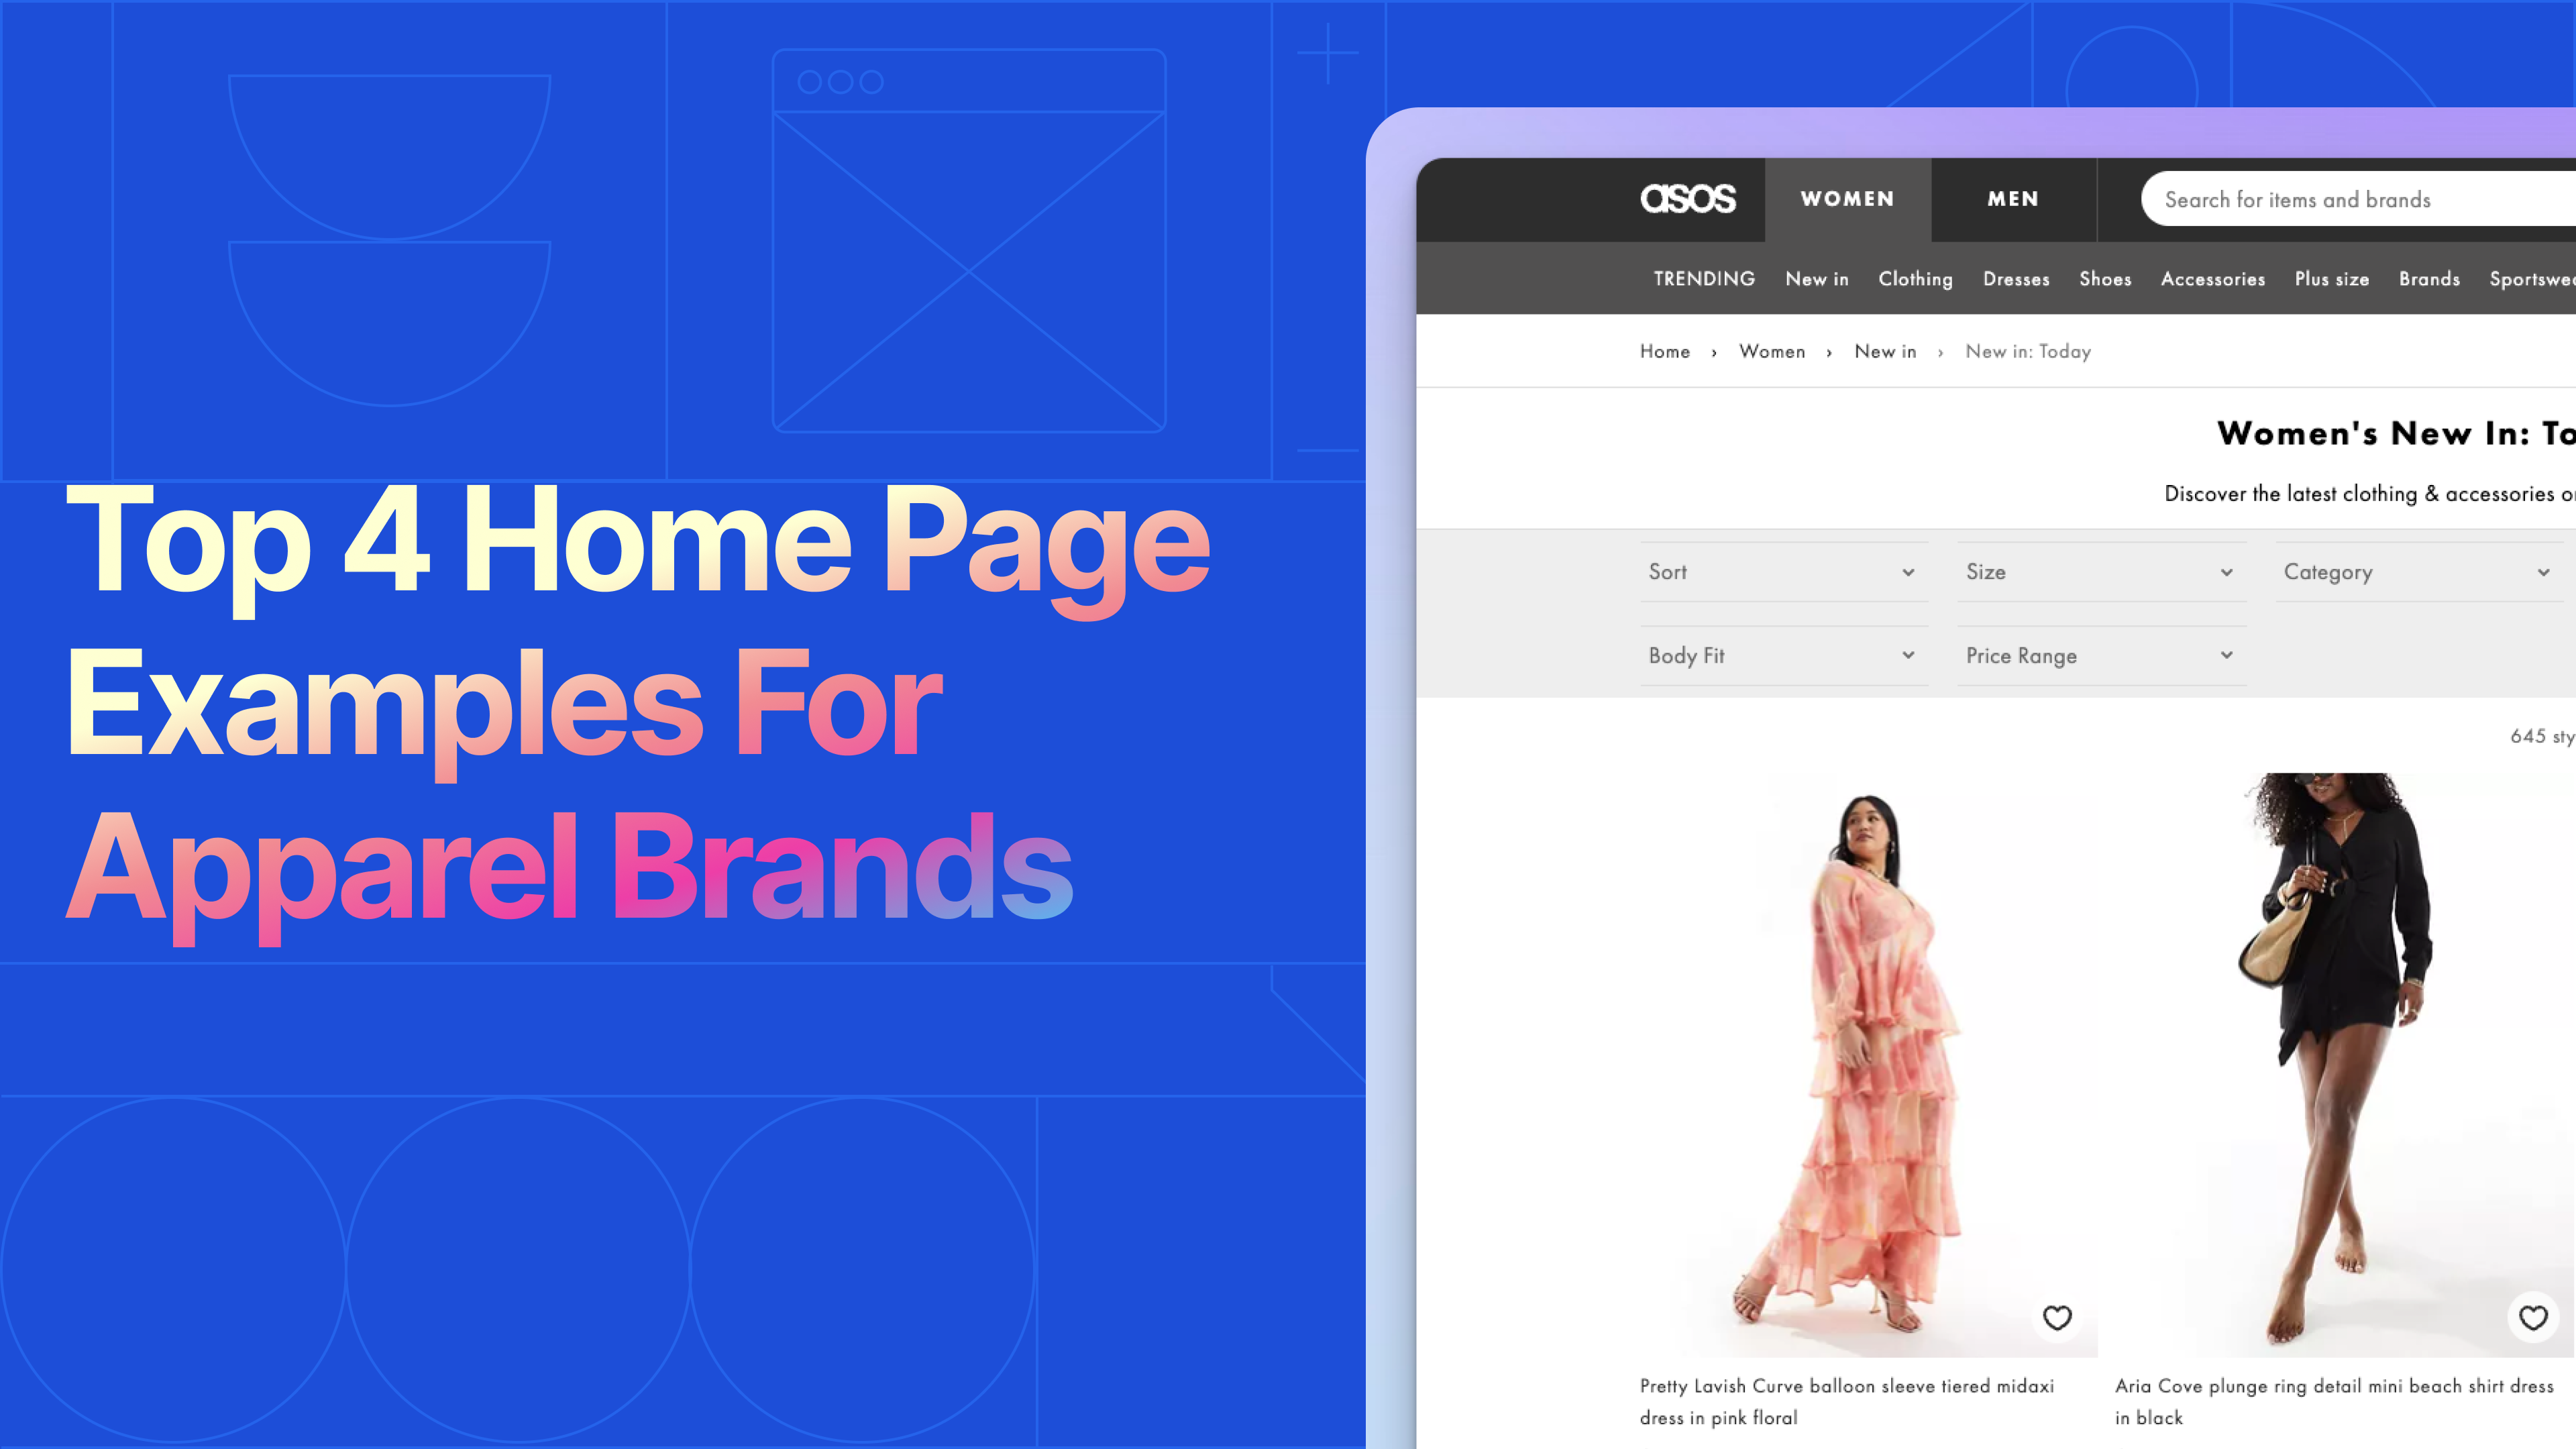 Top 4 Favorite Home Page Examples For Apparel Brands